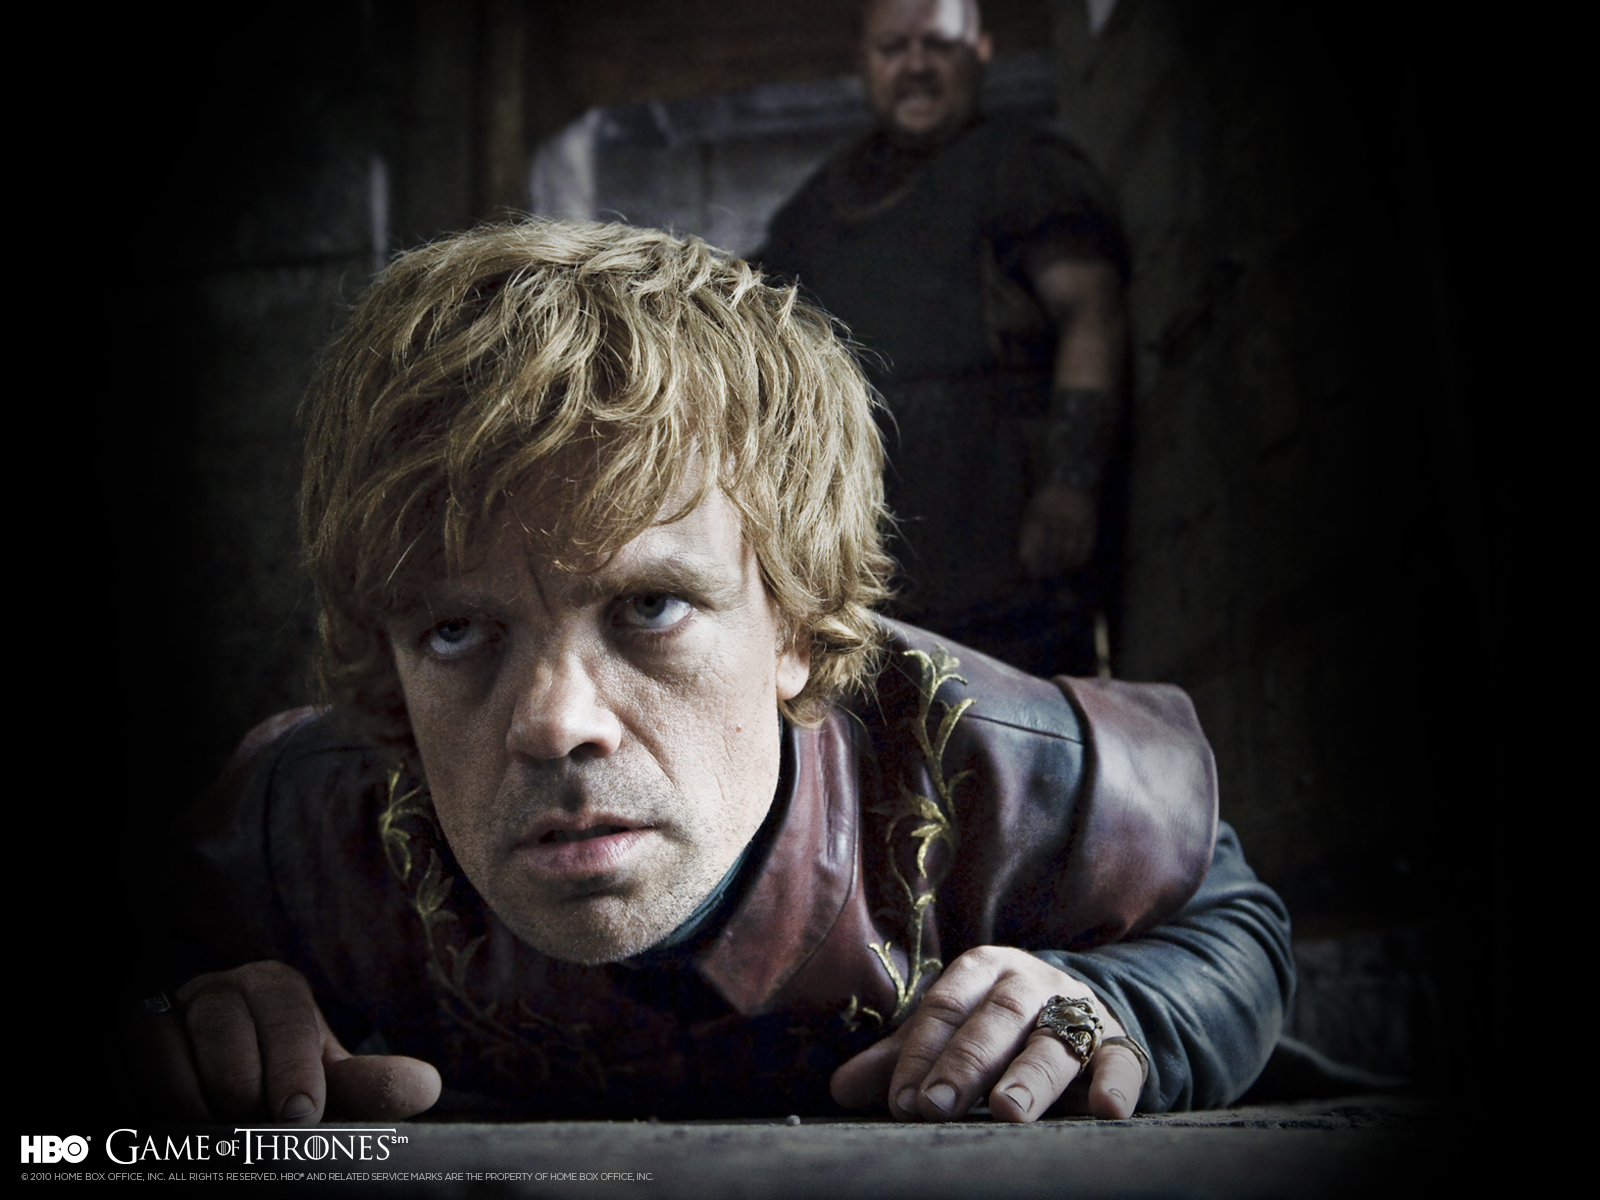 New Lock Screen Wallpapers game of thrones, tv show, peter dinklage, tyrion lannister